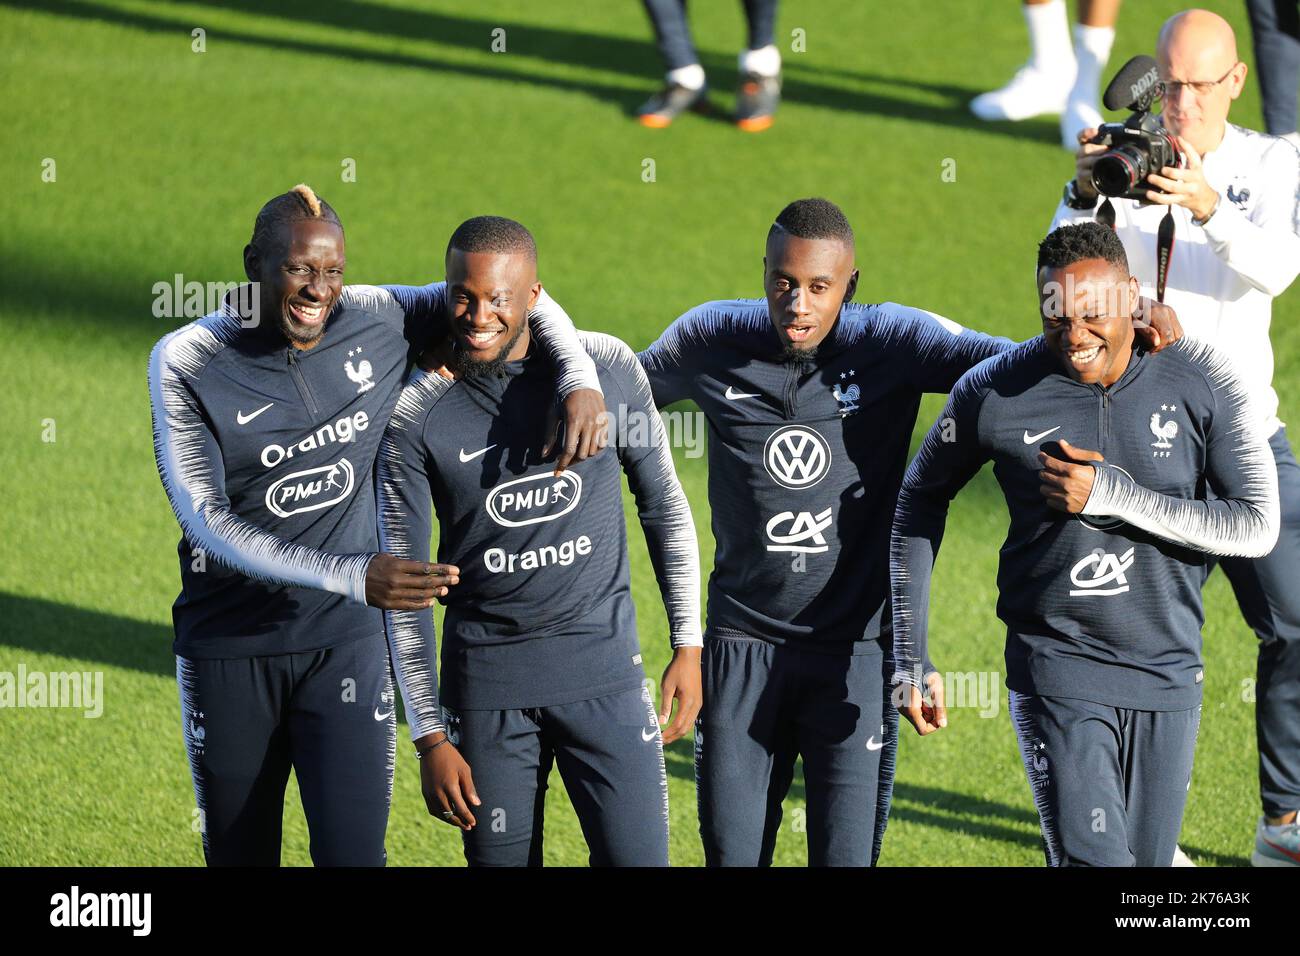 MAMDOU SAKHO, TANGUY NDOMBELE, BLAISE MATUIDI, STEVE MANDANDA during a training session in Clairefontaine on October 8, 2018, ahead the unpcoming friendly football match against Iceland and the Nations League match against Germany. Stock Photo